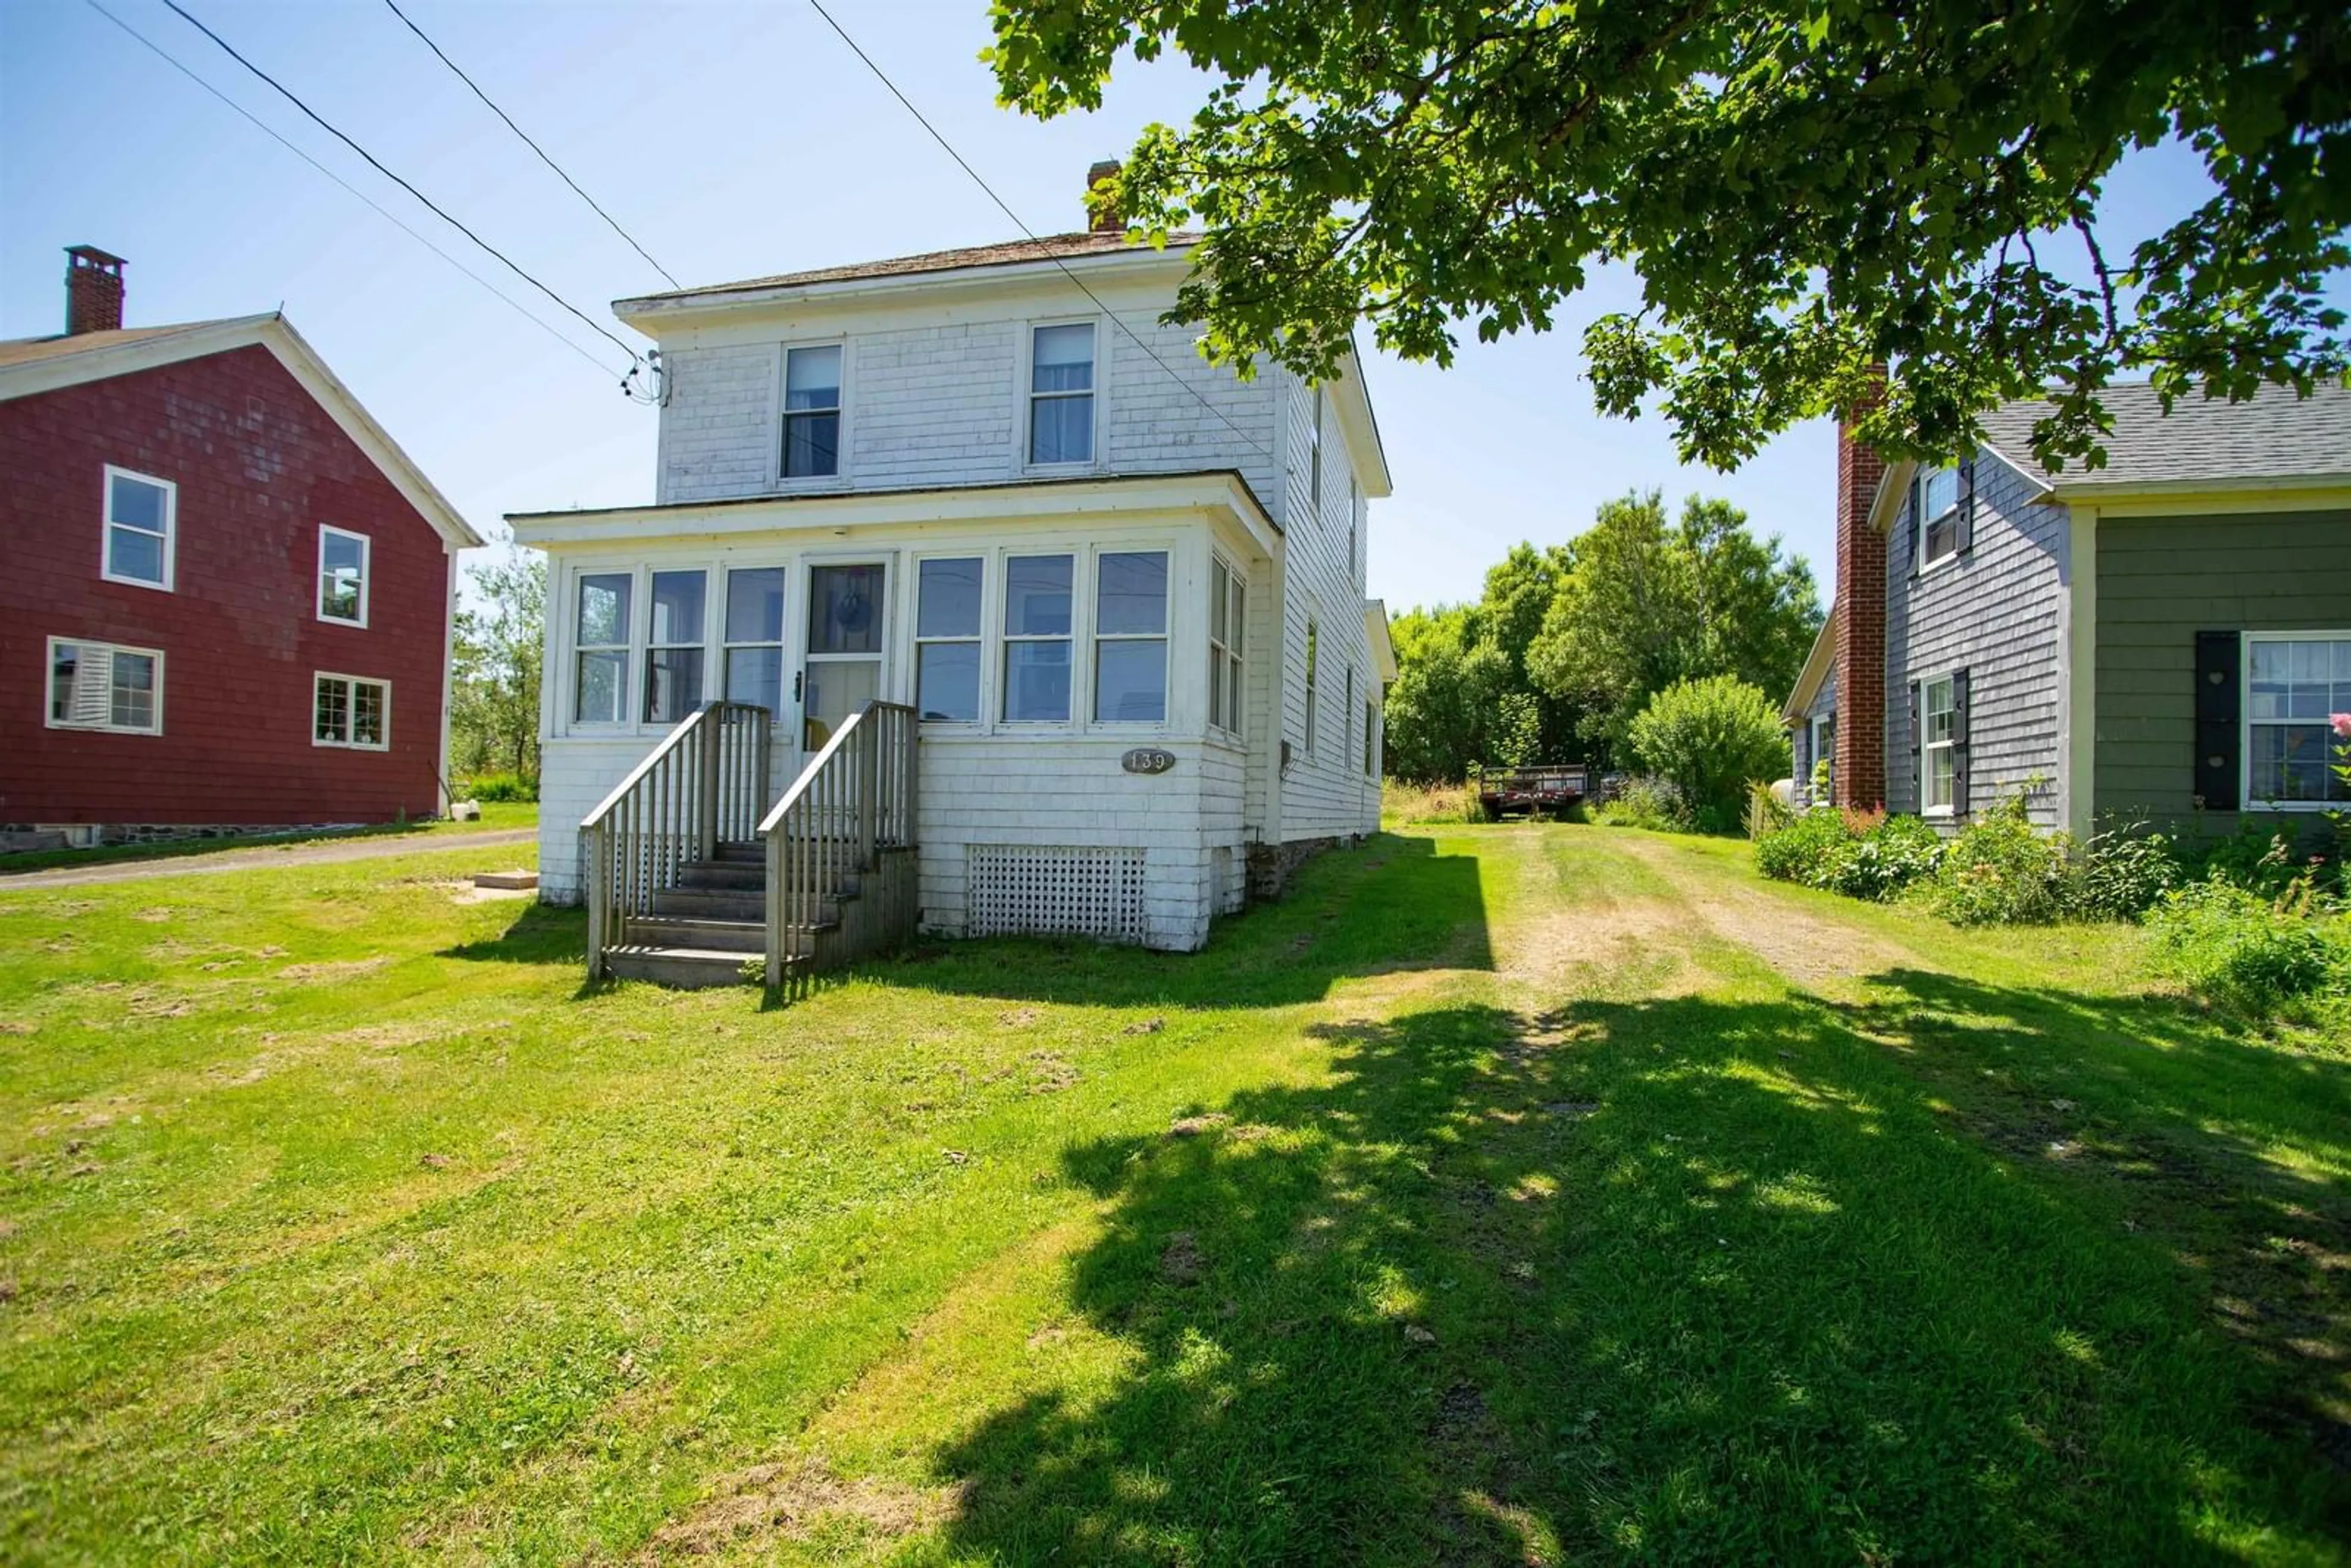 Home with unknown exterior material for 139 Water Street, Westport Nova Scotia B0V 1H0